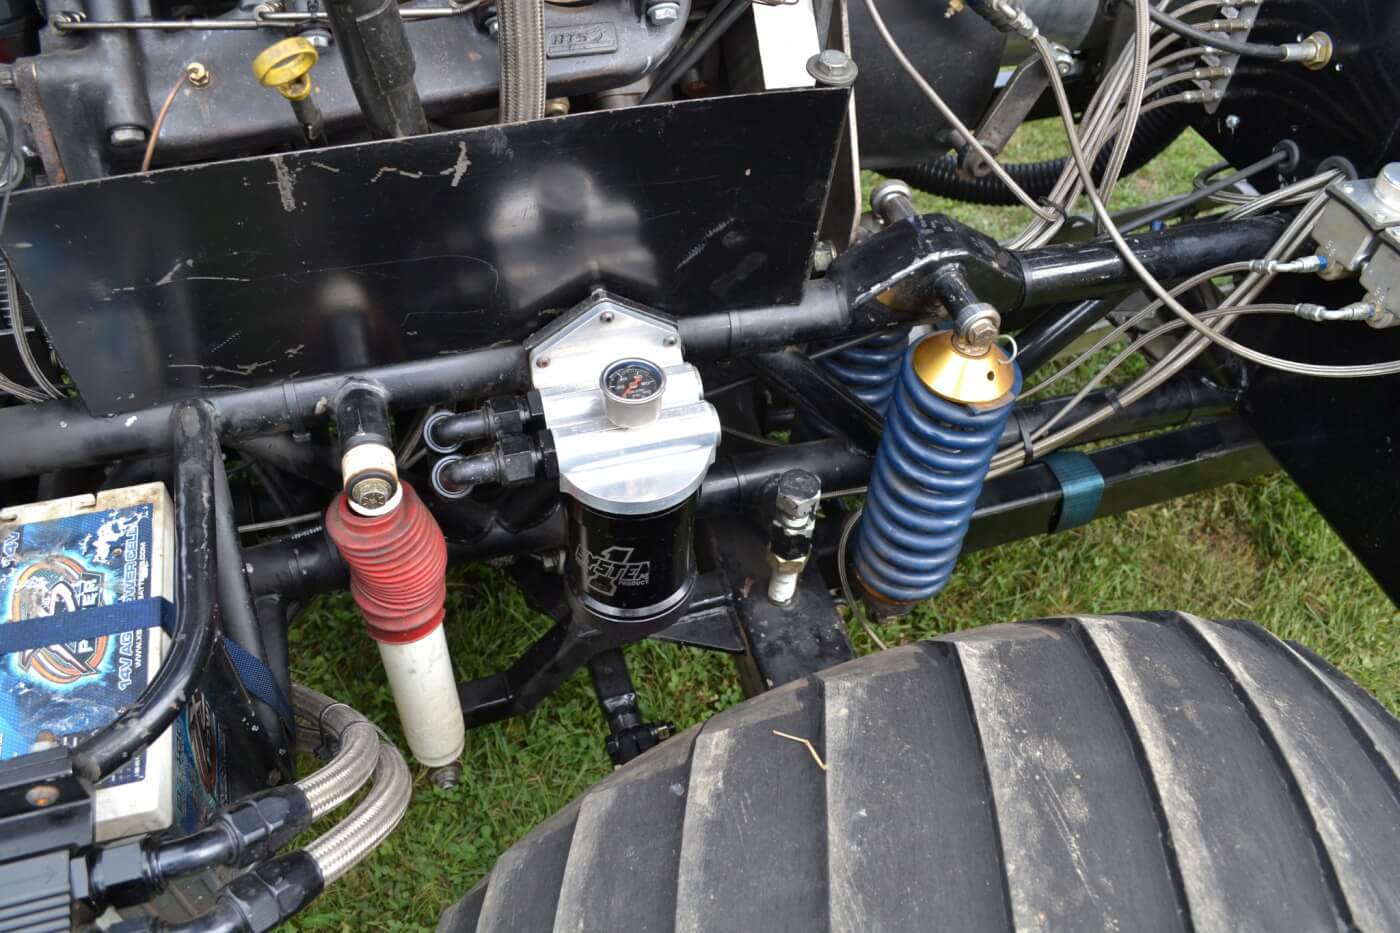 The front suspension came with the Barker-built tube chassis, and Kyle admits he hasn't touched it much over the years. There are two coilovers and one shock per side, which are used to dampen the front axle, which is a mix of military and Rockwell F106 parts. Also visible in the left corner is one of four 14-volt batteries, which Kyle runs to prevent any voltage drop, as the truck's electric over hydraulic steering takes some serious amperage to run.